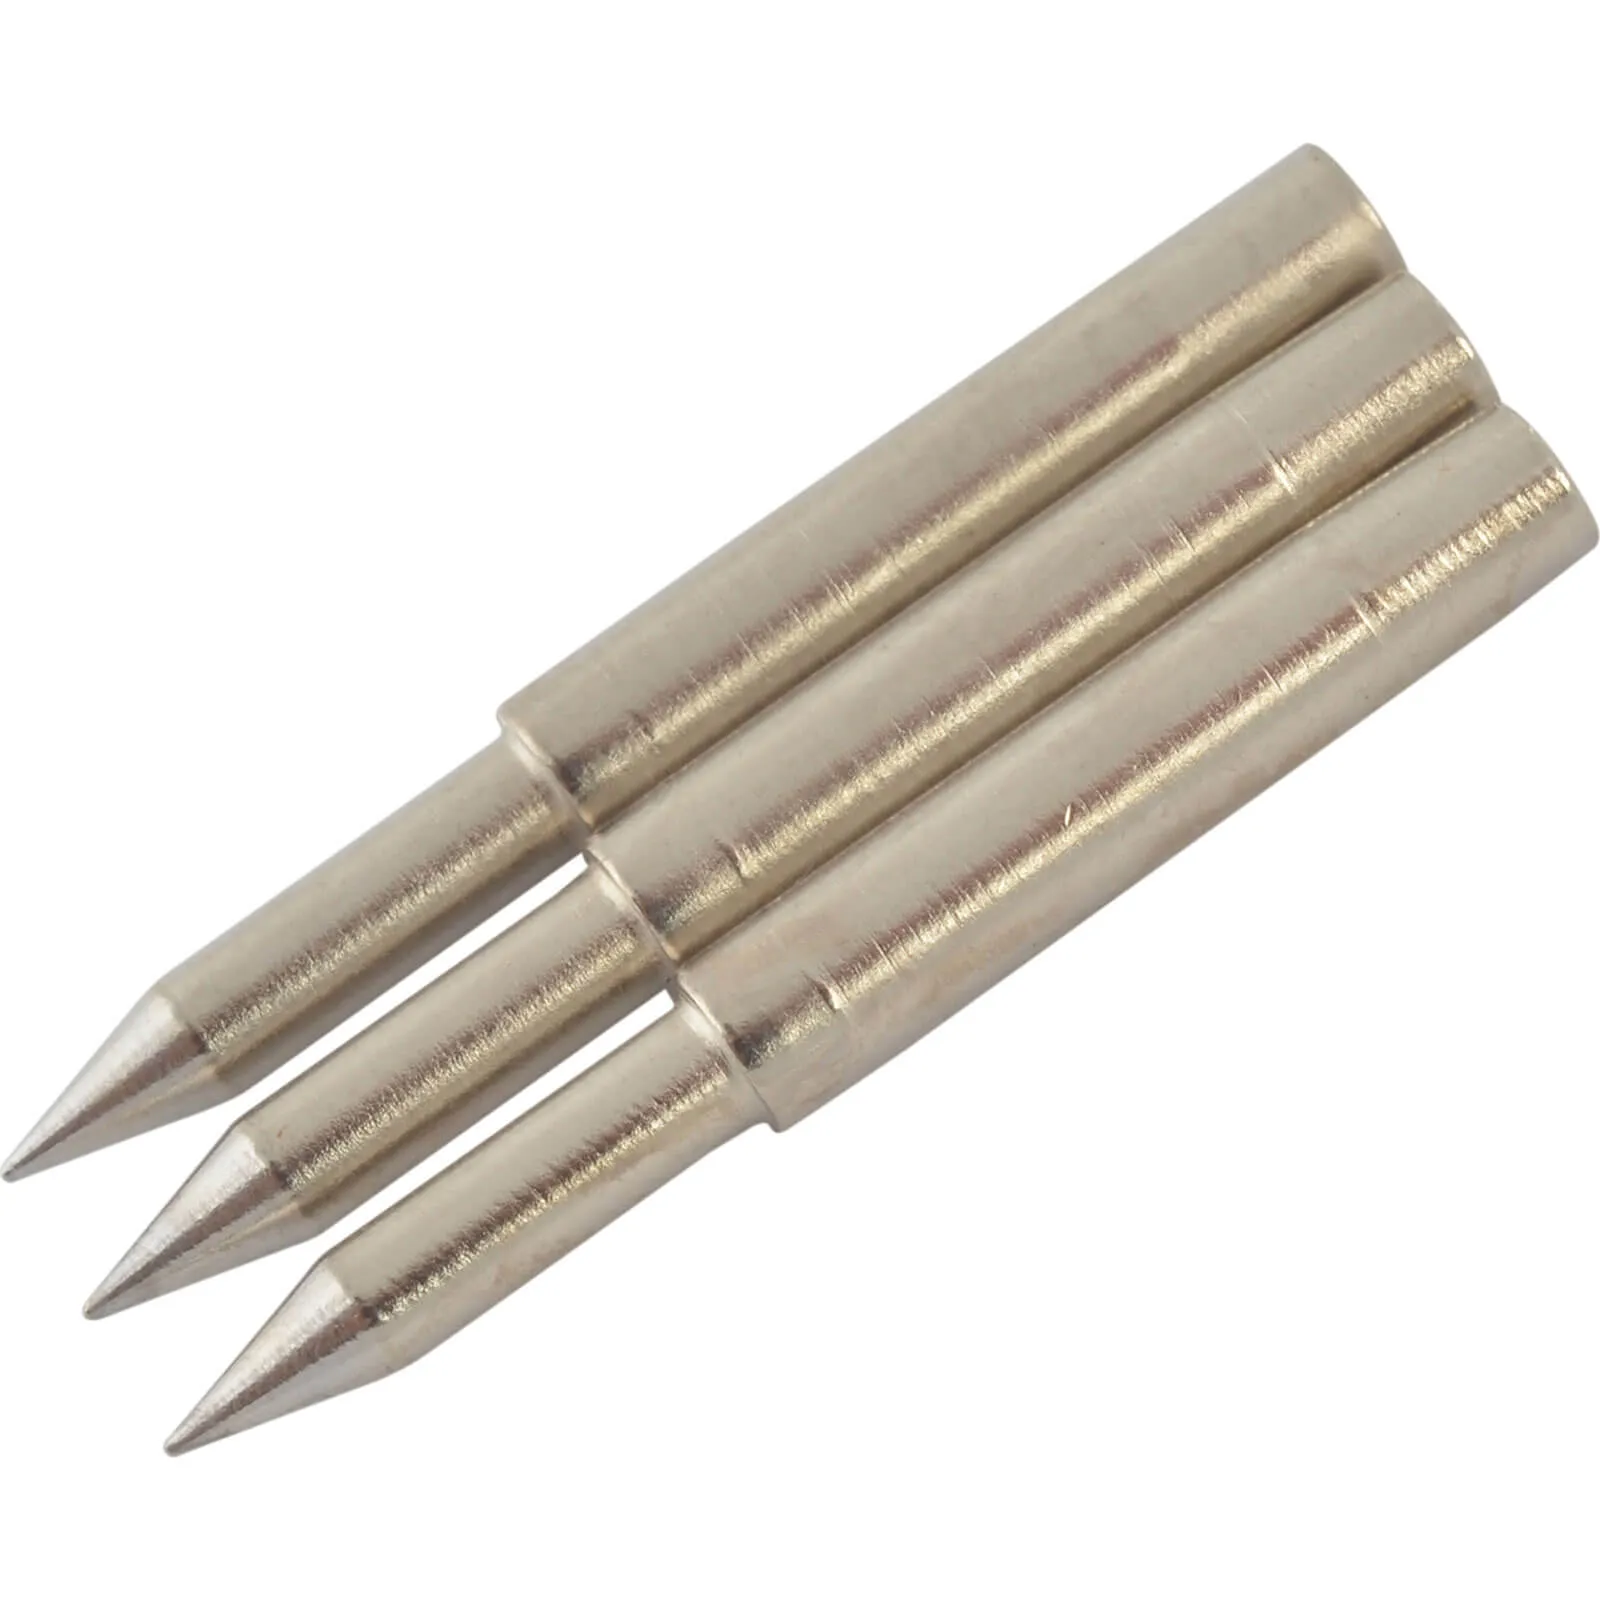 Weller 3 Piece Micro Point Tip Set for 2012 Soldering Iron